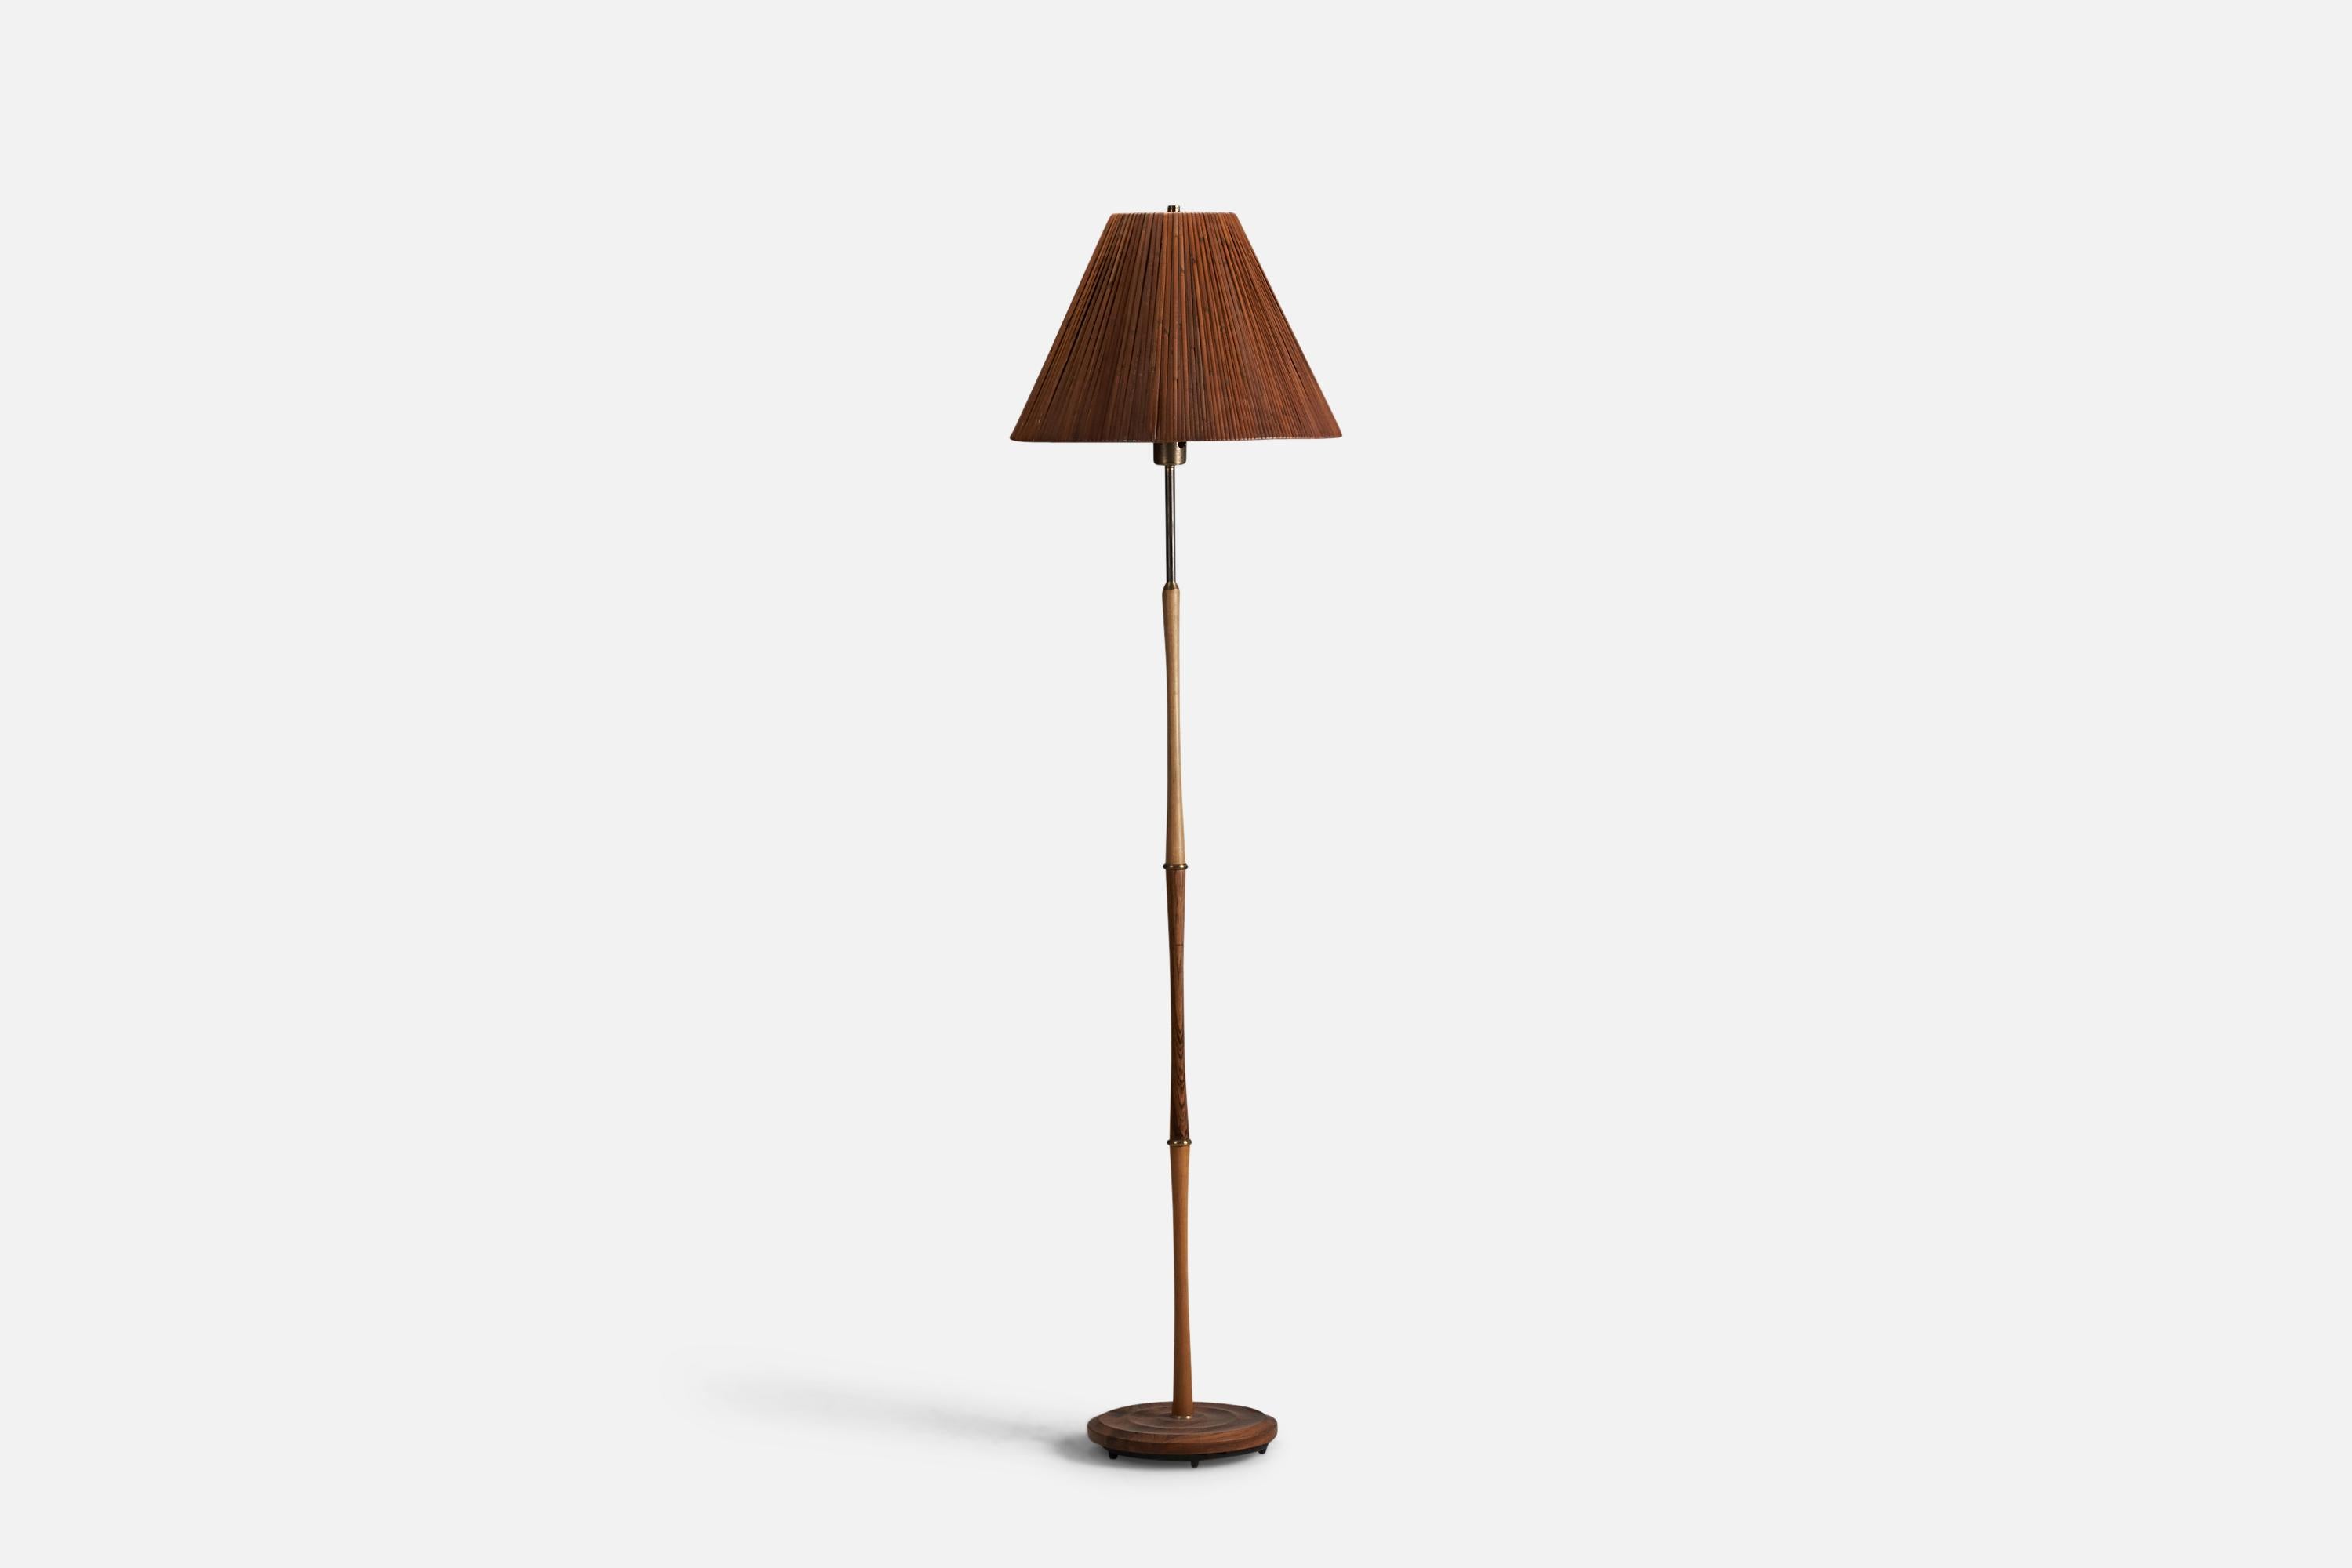 A rosewood, oak, teak, brass and rattan floor lamp designed and produced by Nybro Armaturfabrik, Sweden, 1950s.

Socket takes standard E-26 medium base bulb.

There is no maximum wattage stated on the fixture.